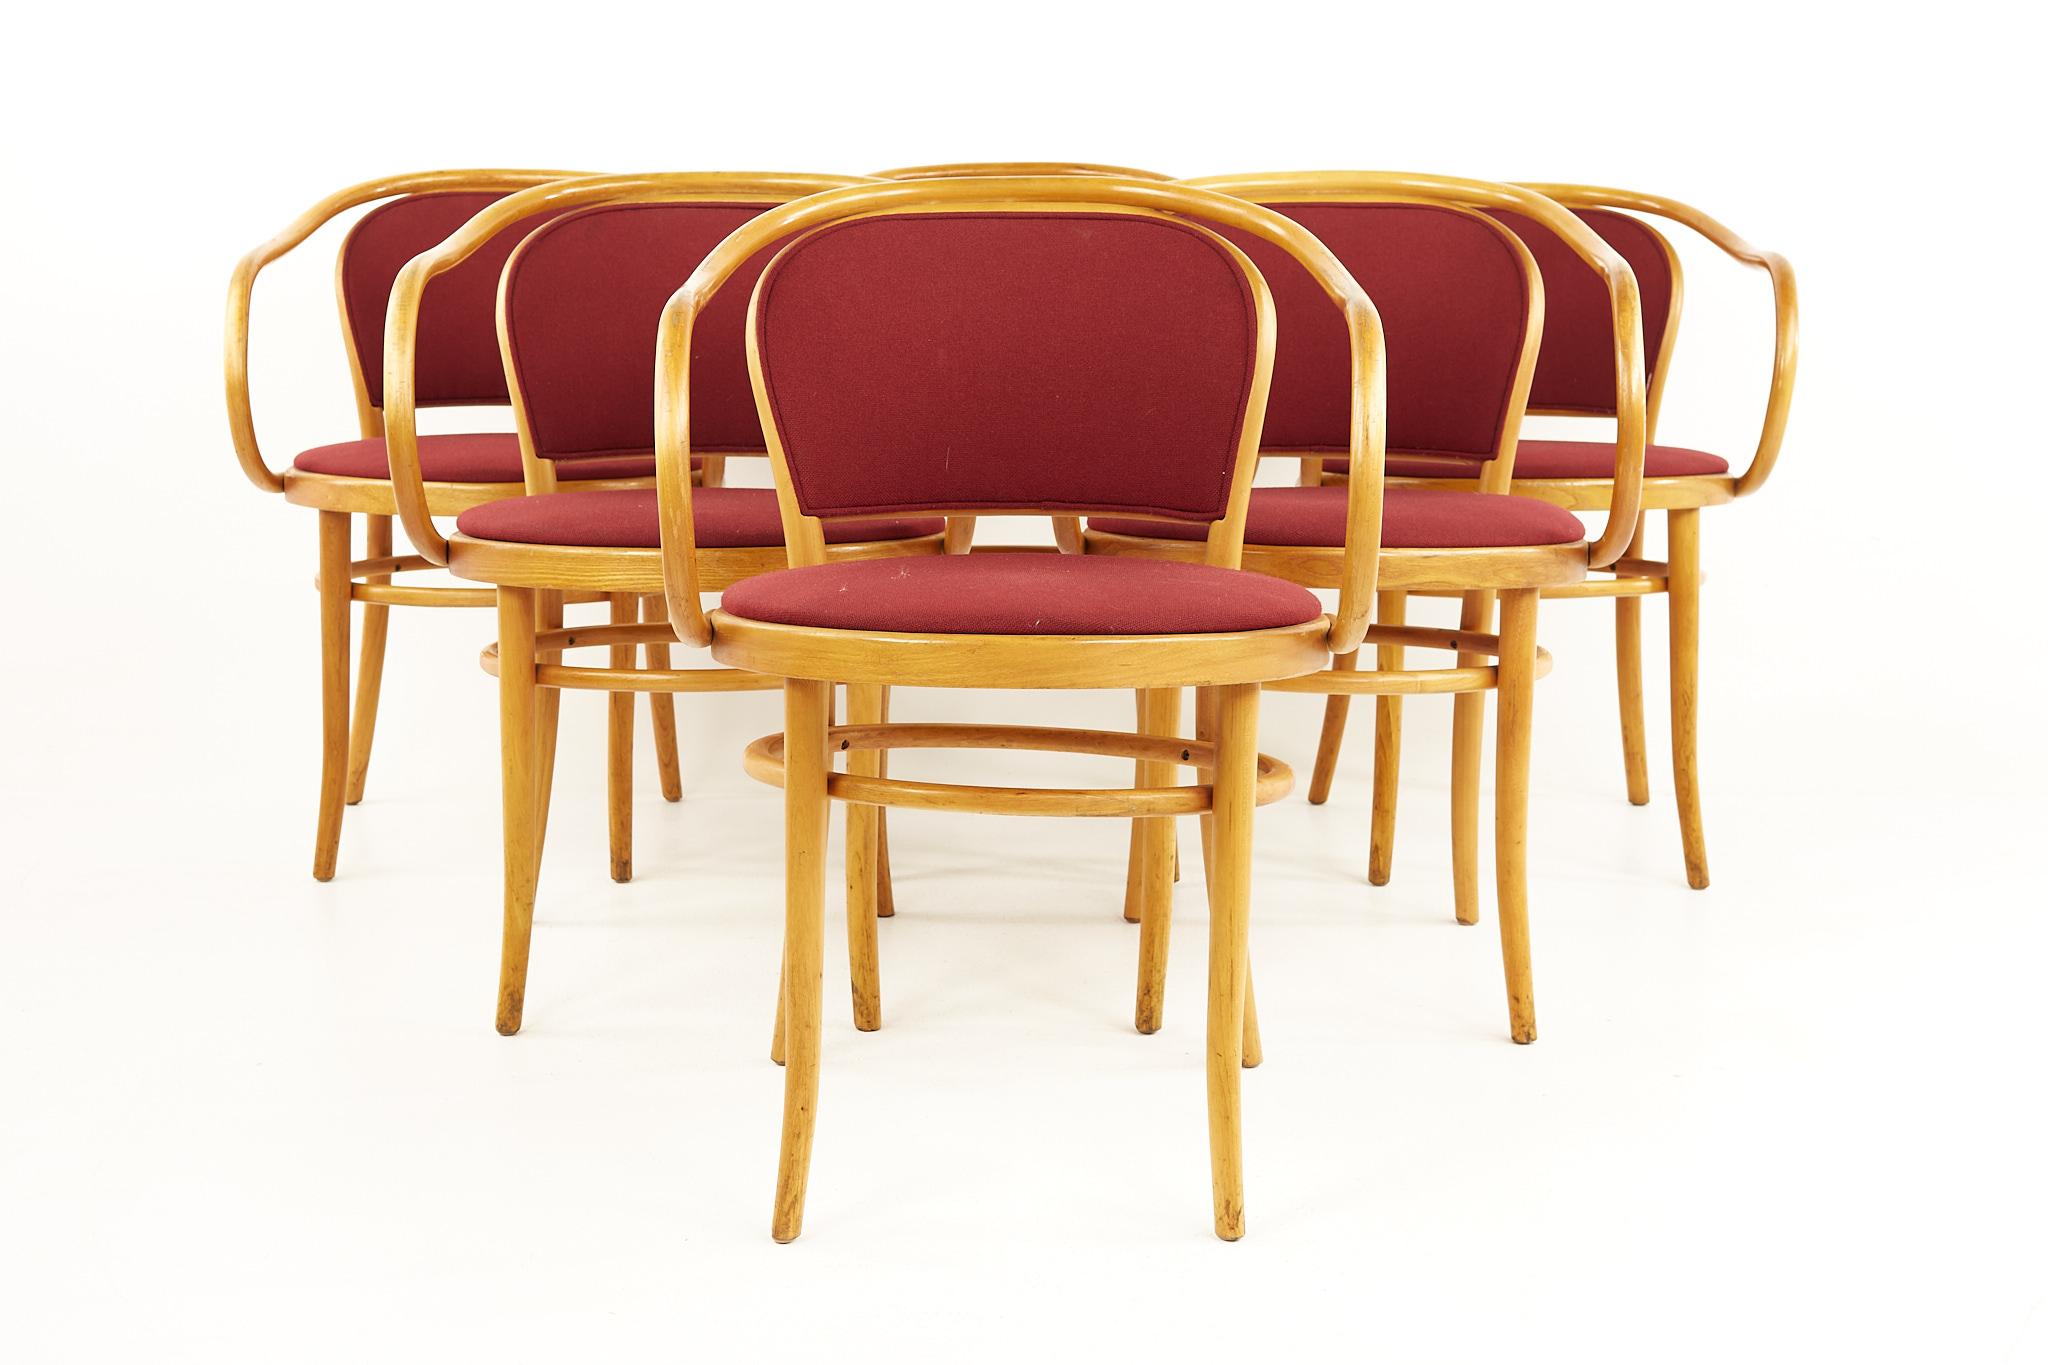 Le Corbusier for Thonet mid century bentwood dining chairs - Set of 6

Each chair measures: 21 wide x 22 deep x 31 high, with a seat height of 19 inches and an arm height of 27.5 inches 

All pieces of furniture can be had in what we call